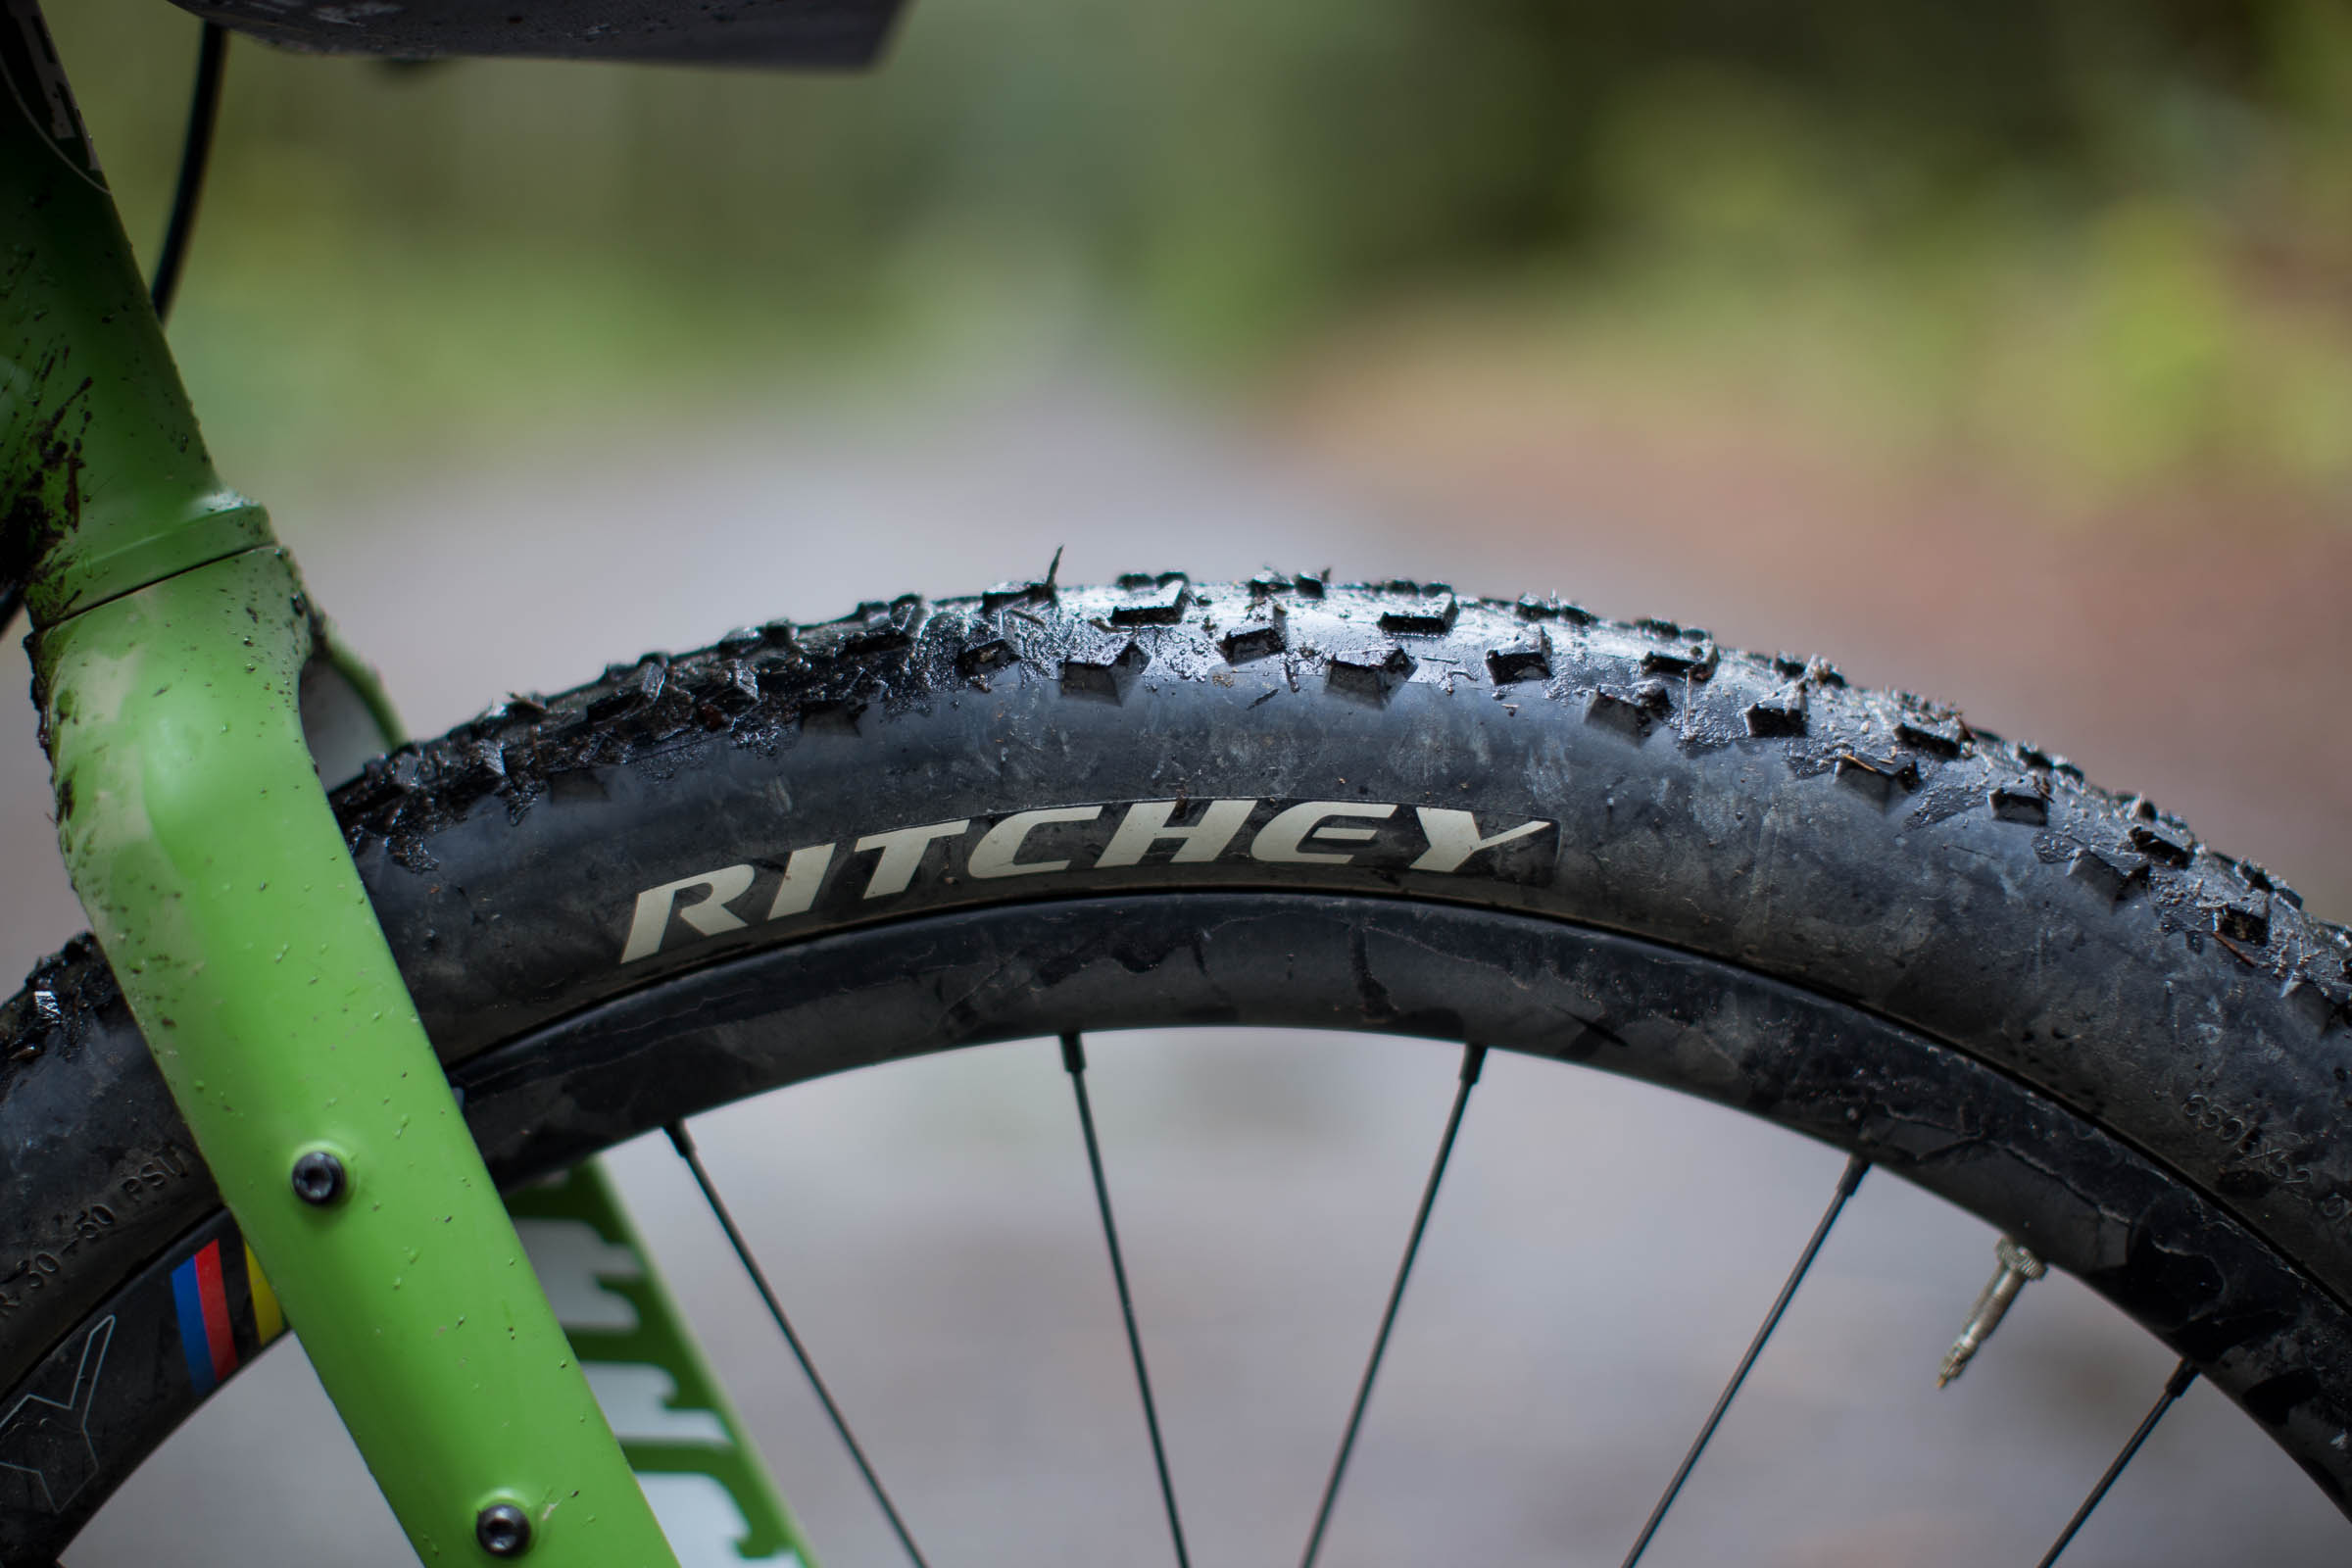 Ritchey Bicycle, Outback review, Offroad adventure, Biking exploration, 2400x1600 HD Desktop